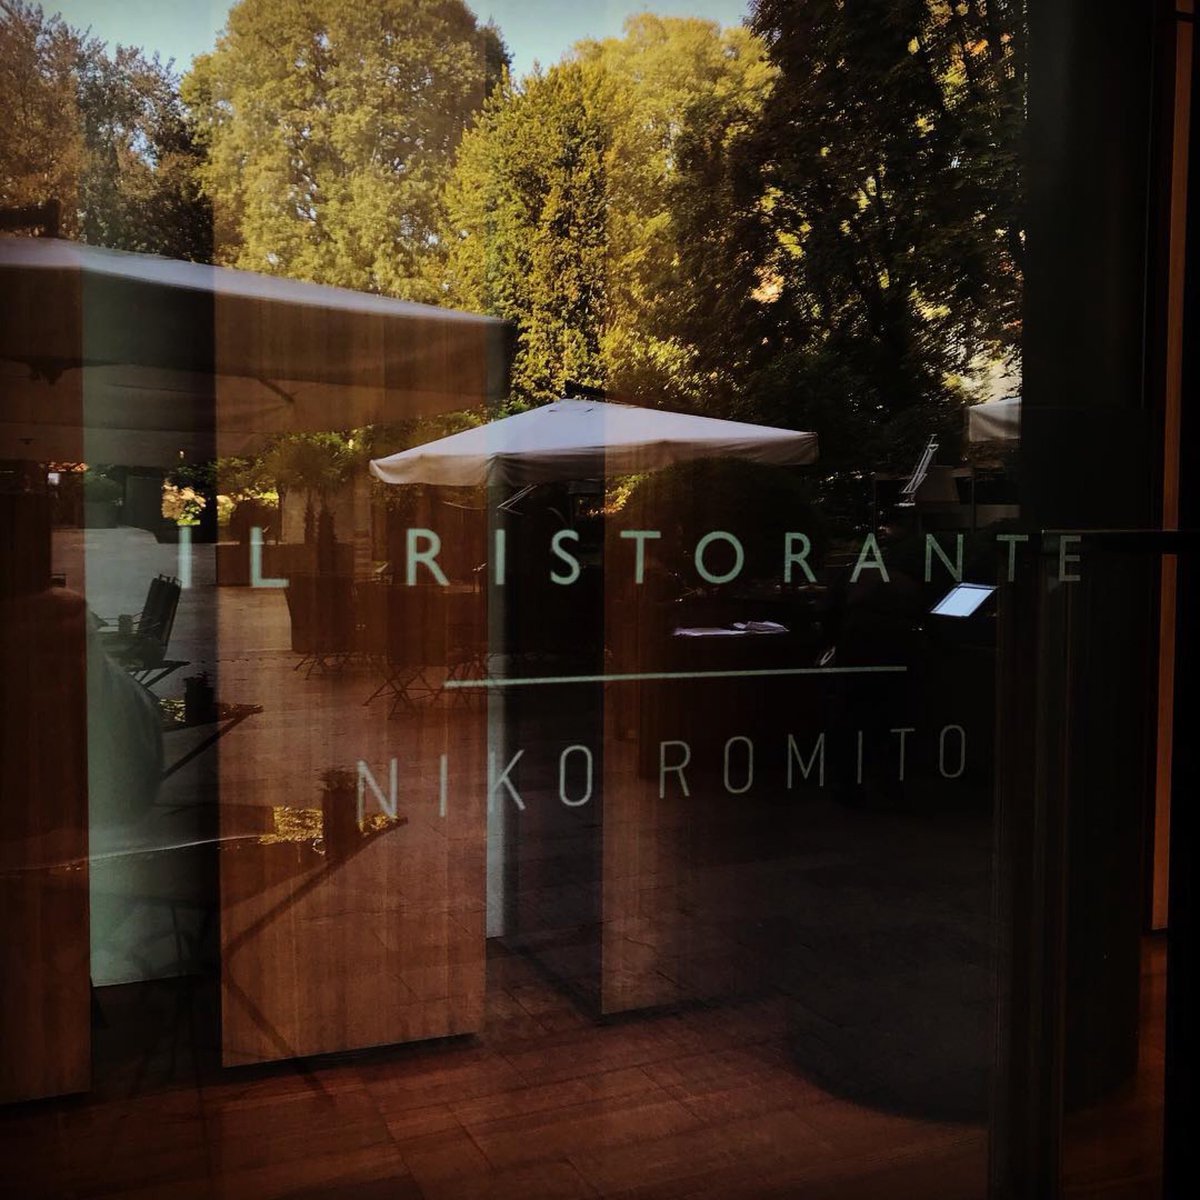 There’s a new name in Milan’s culinary scene—and it won’t be a secret for long. Il Ristorante-Niko Romito is now open! . #milan #bulgarihotelmilano #bulgarihotels @NikoRomito